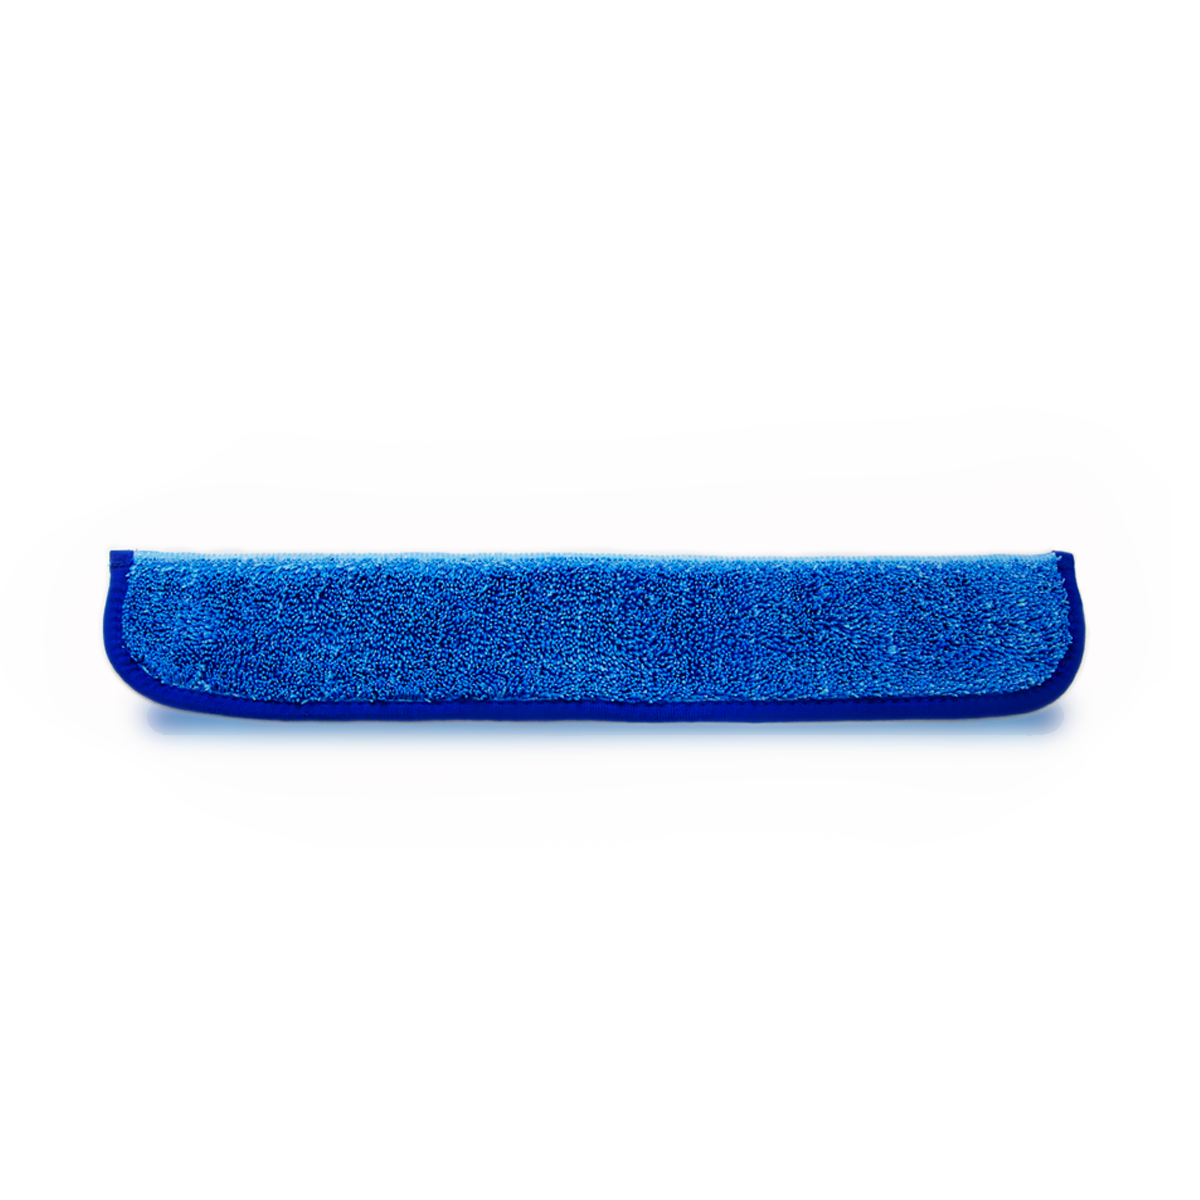 Blue Microfiber Pad for Flippers, Combi & Wave